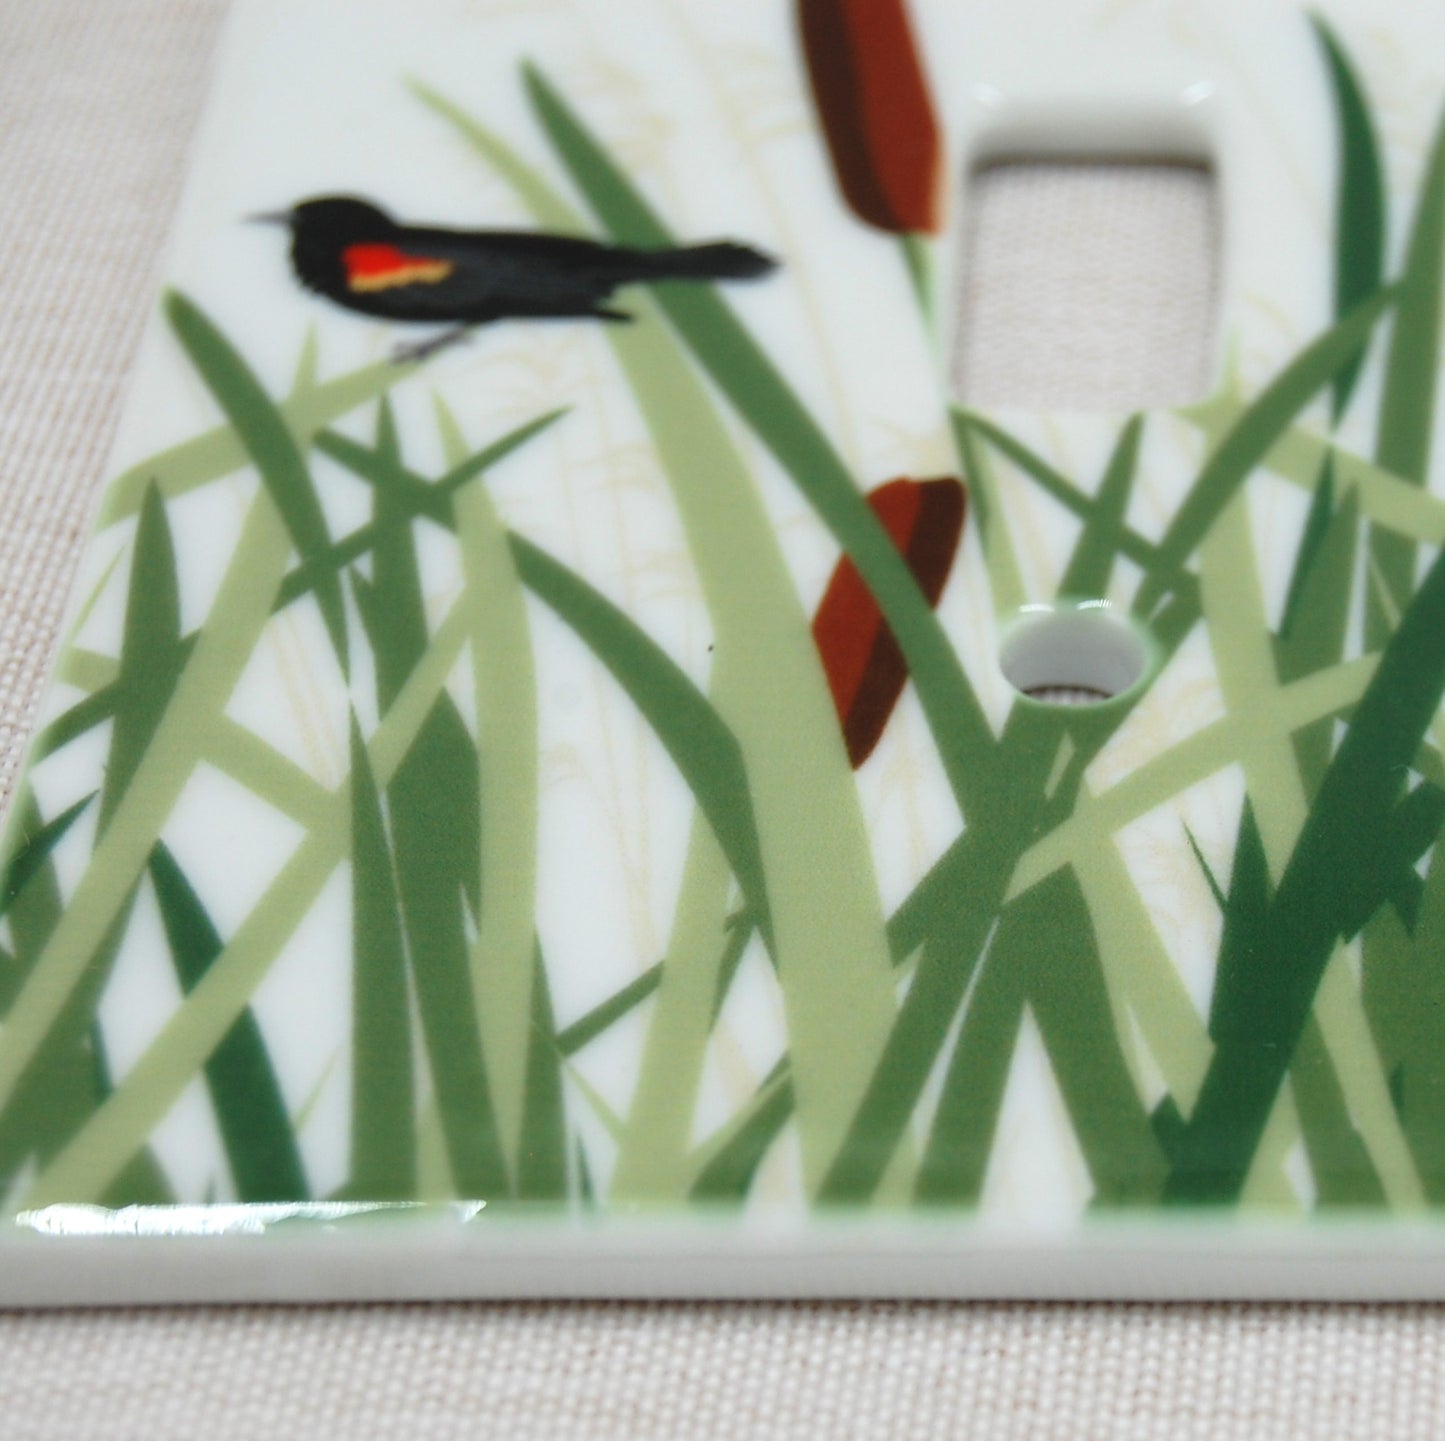 Detail shot of the Red Winged Blackbird porcelain switch plate